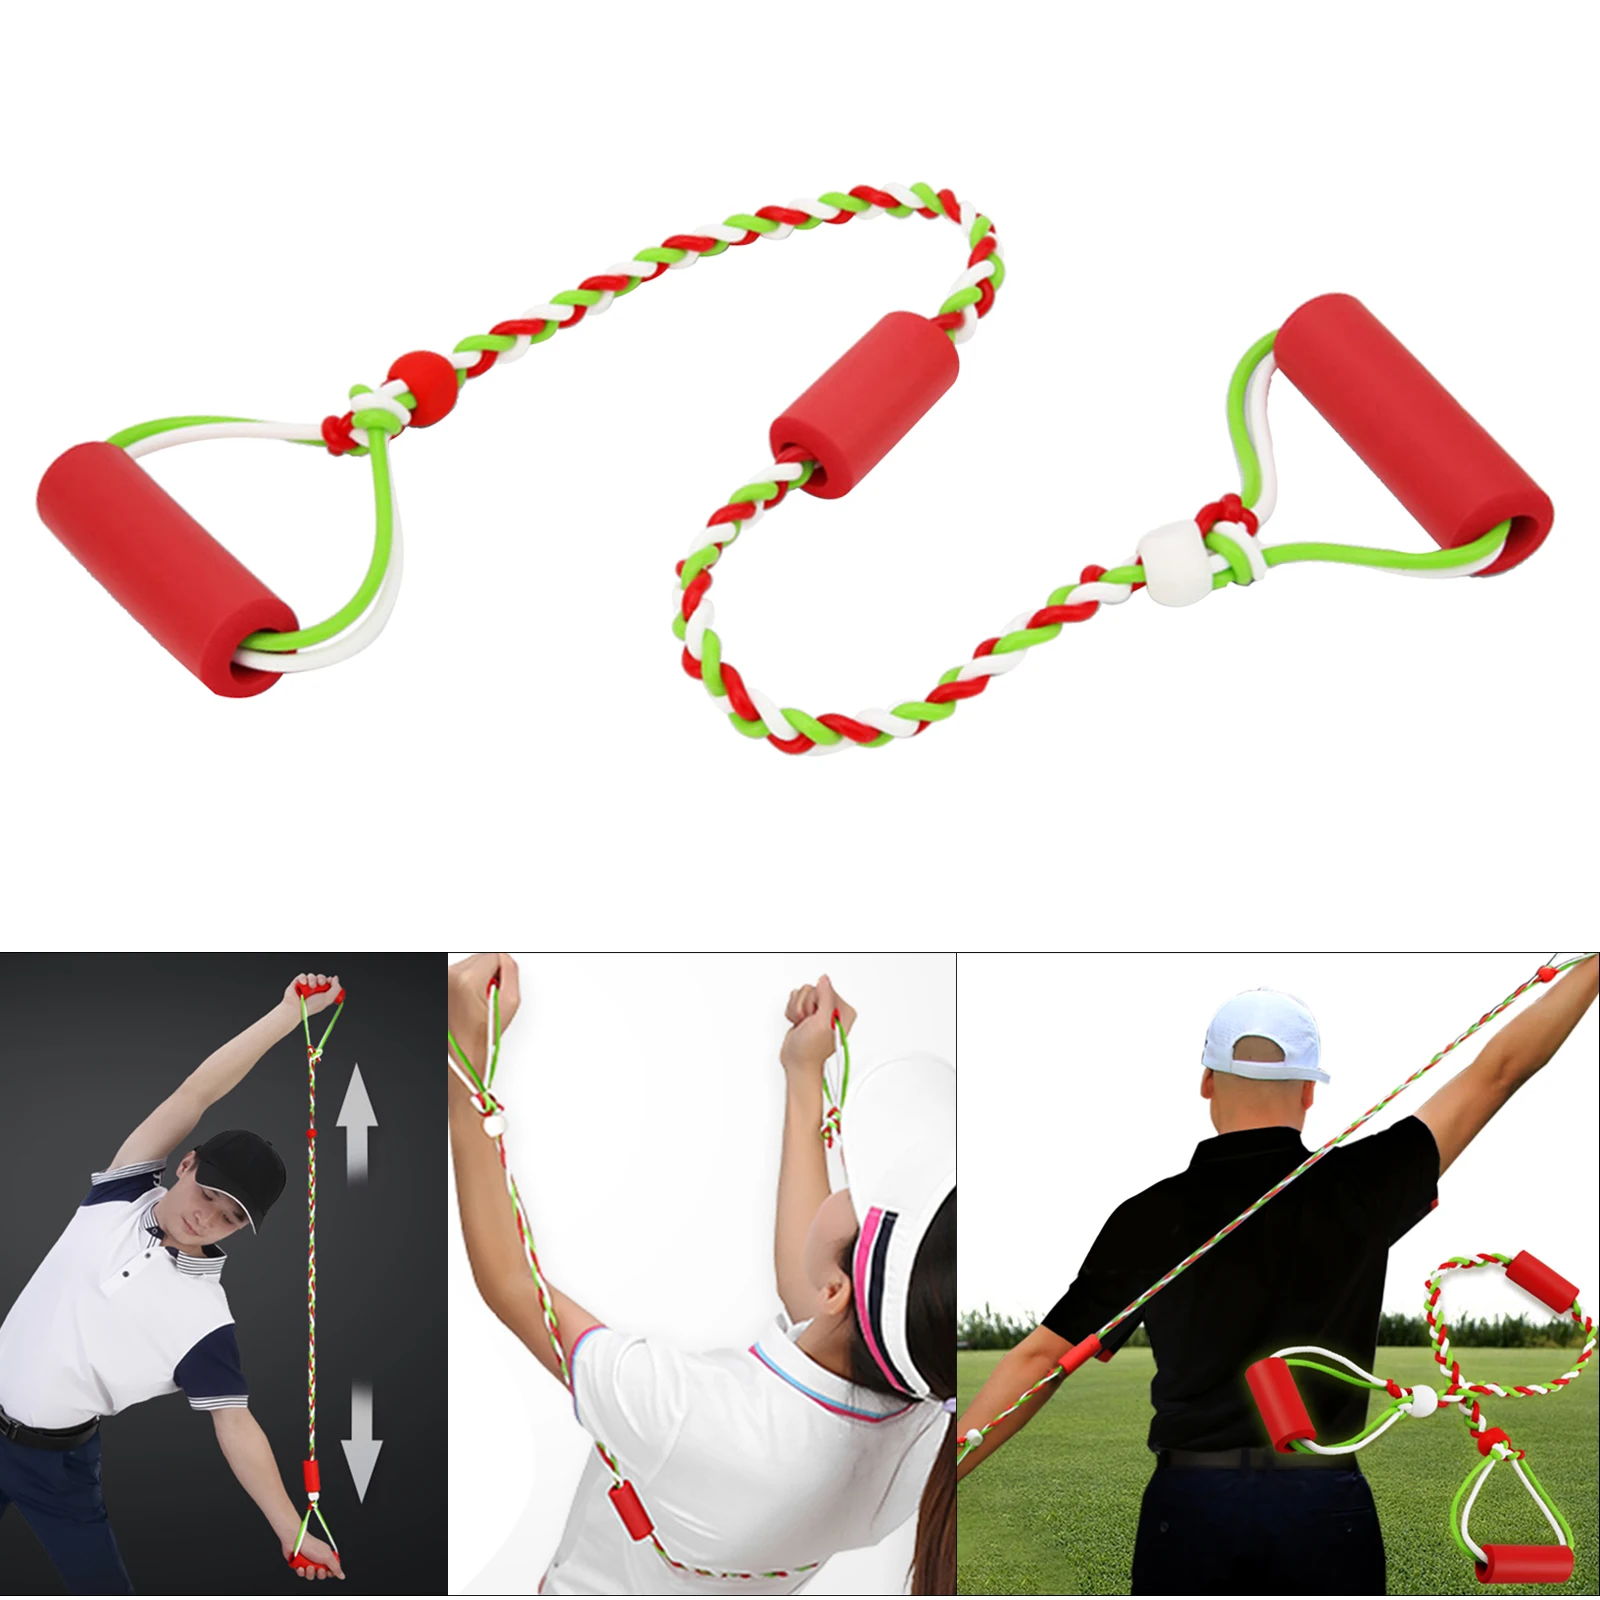 Exerciser Resistance Bands Golf Pilates Warm Up Swing Balance Activation Guide Indoor Outdoor Training Aid Exercise Workout Tool